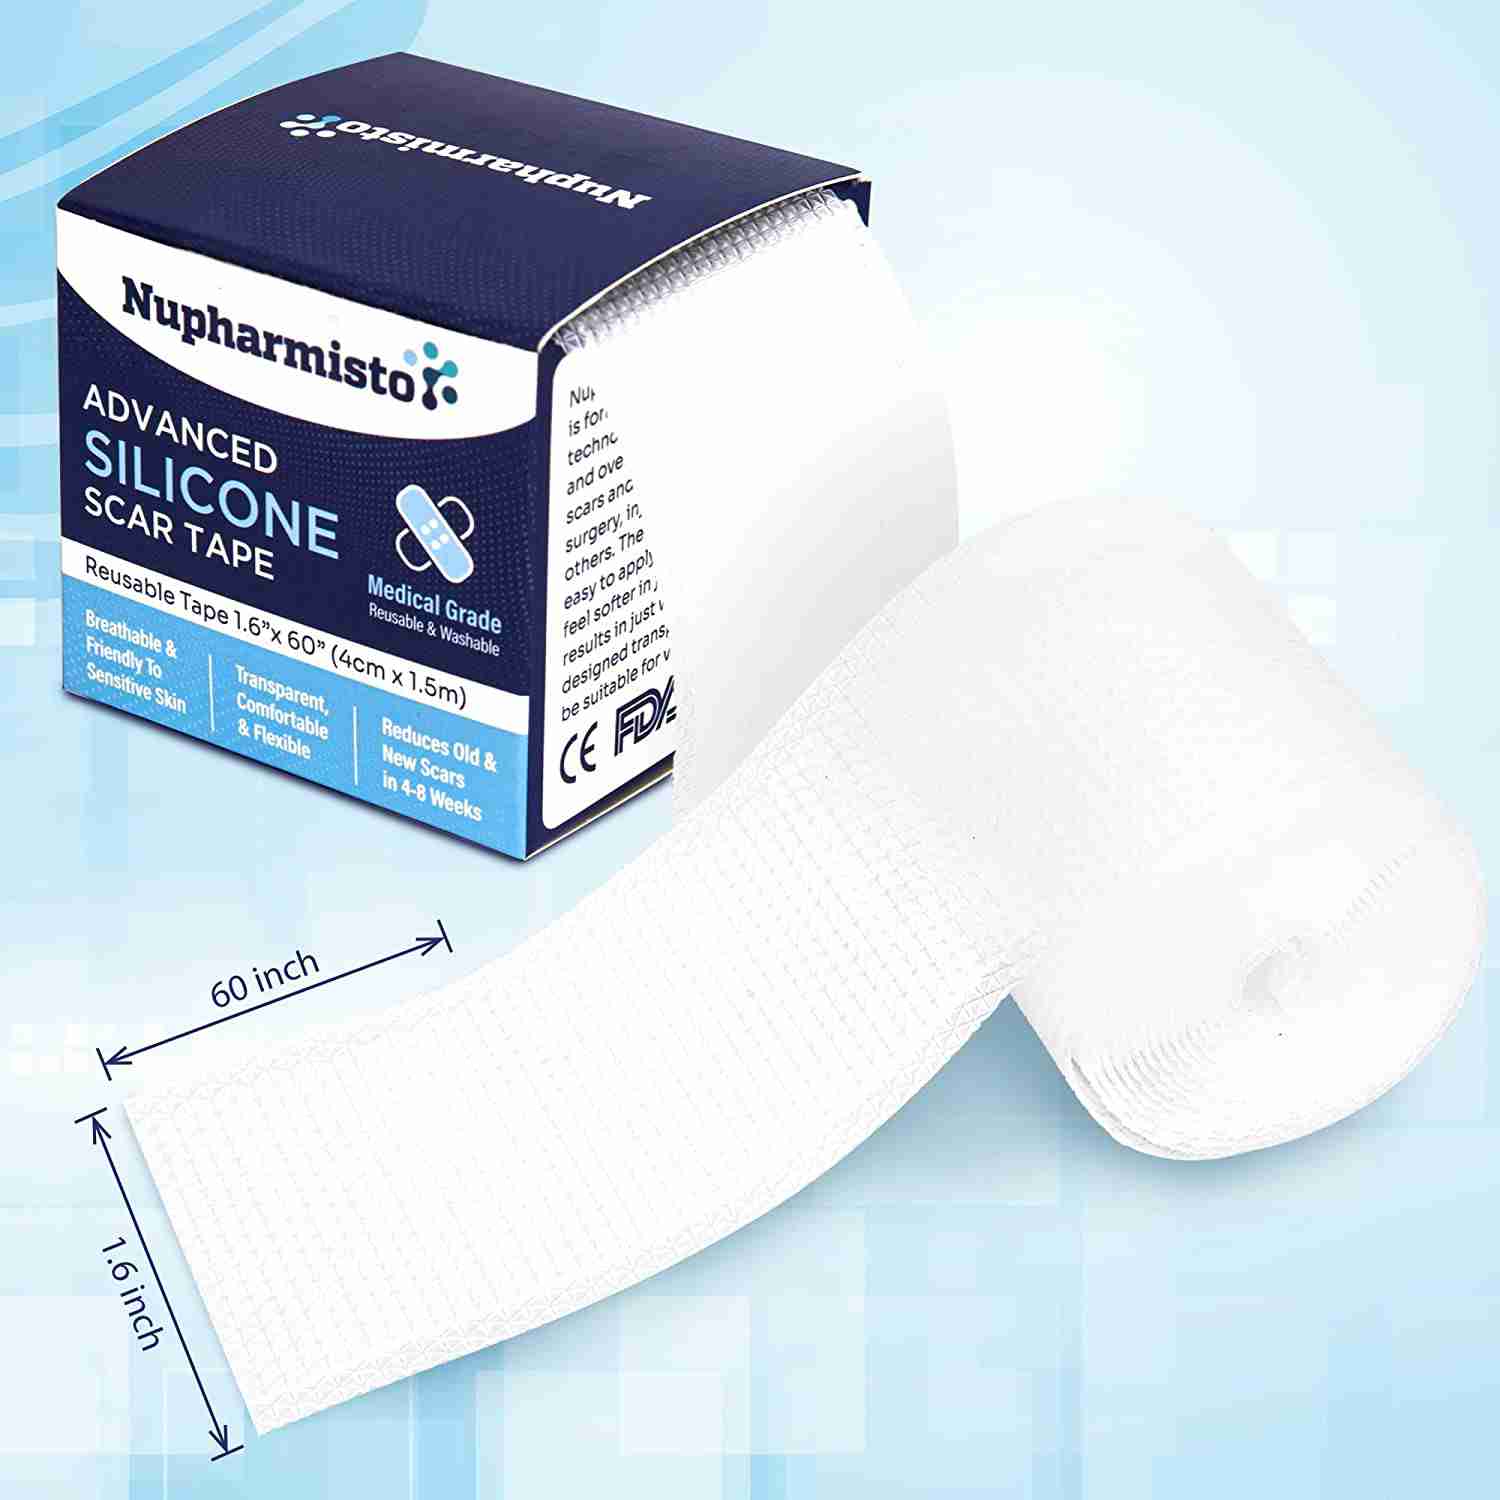 silicone-scar-sheets-nupharmisto with discount code